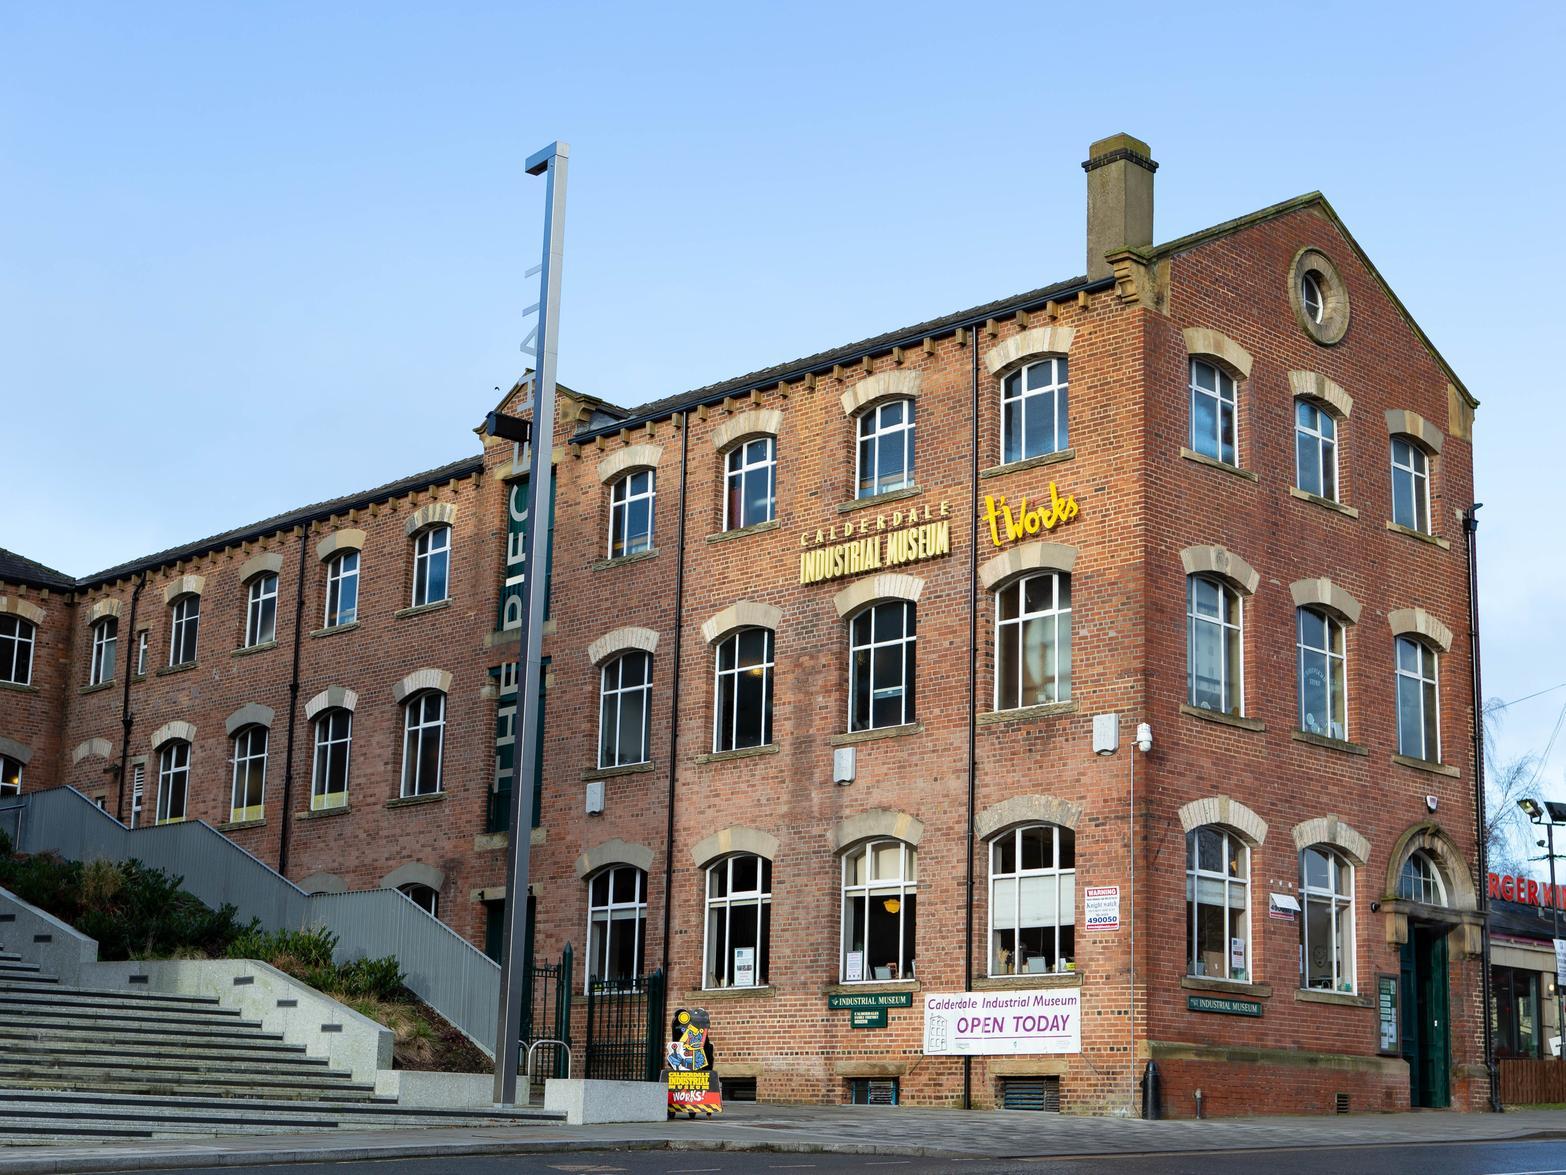 Open on Saturdays, the Calderdale Industrial Museum in Halifax showcases the development of industry in Halifax and Calderdale and gives visitors the chance to learn about the areas history.